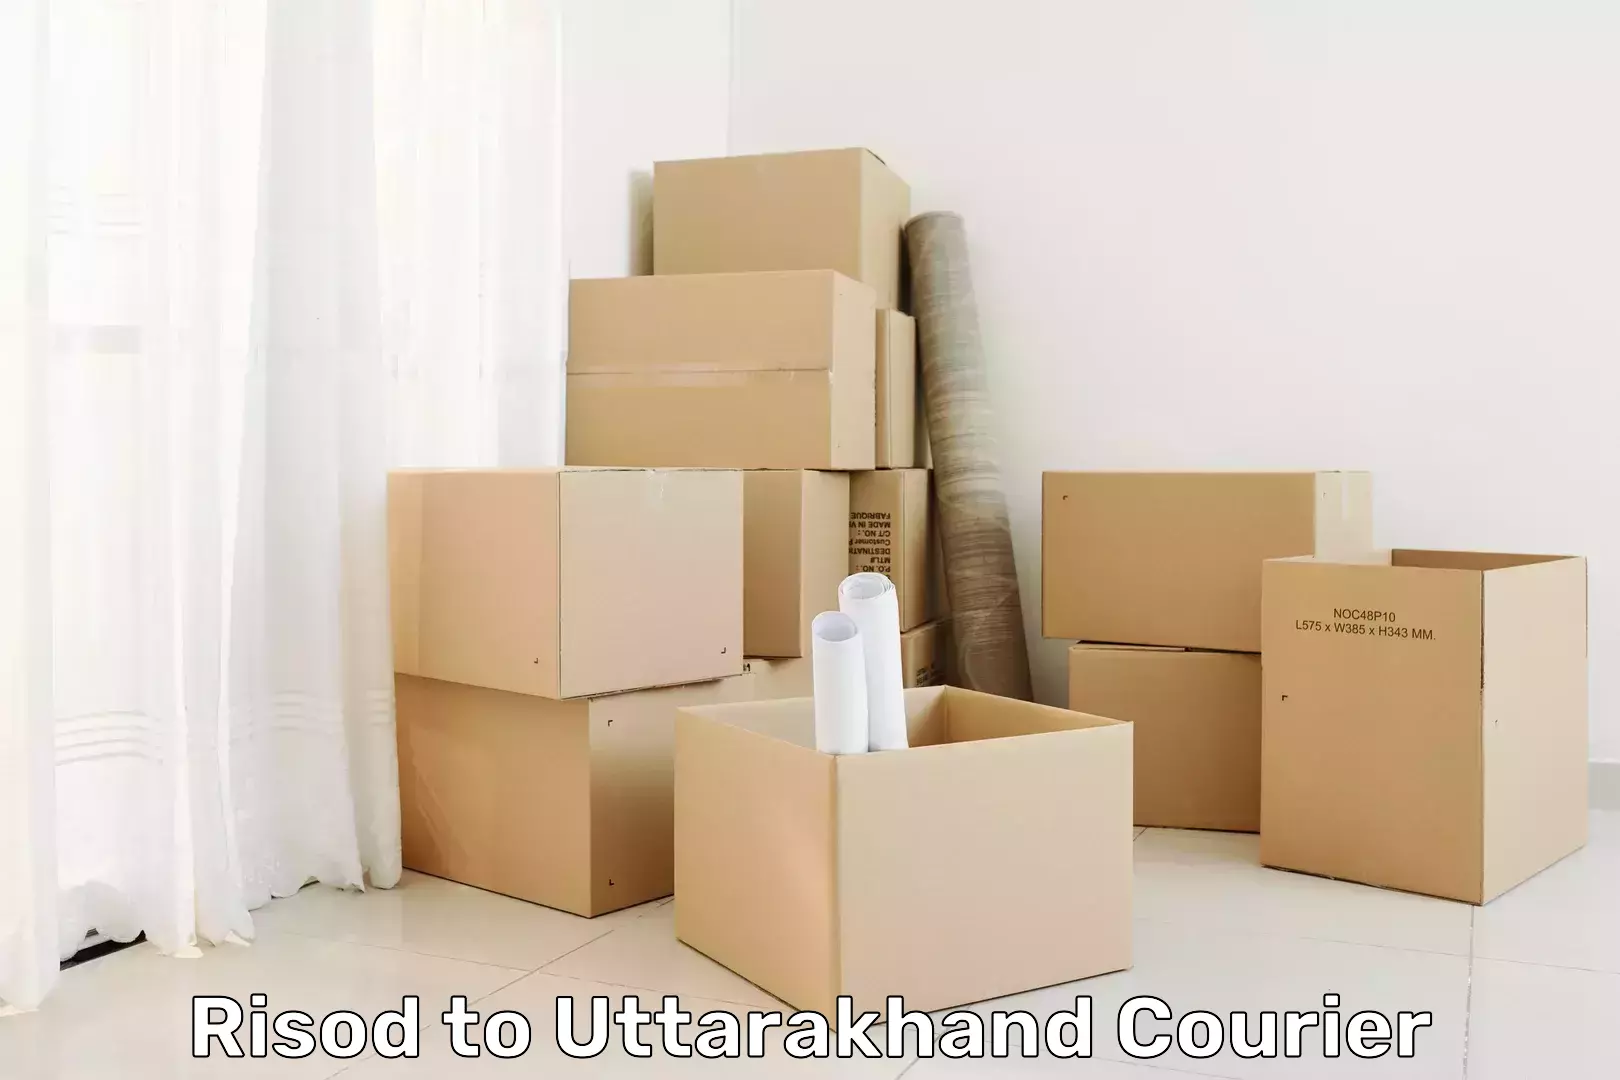 Pharmaceutical courier Risod to Someshwar